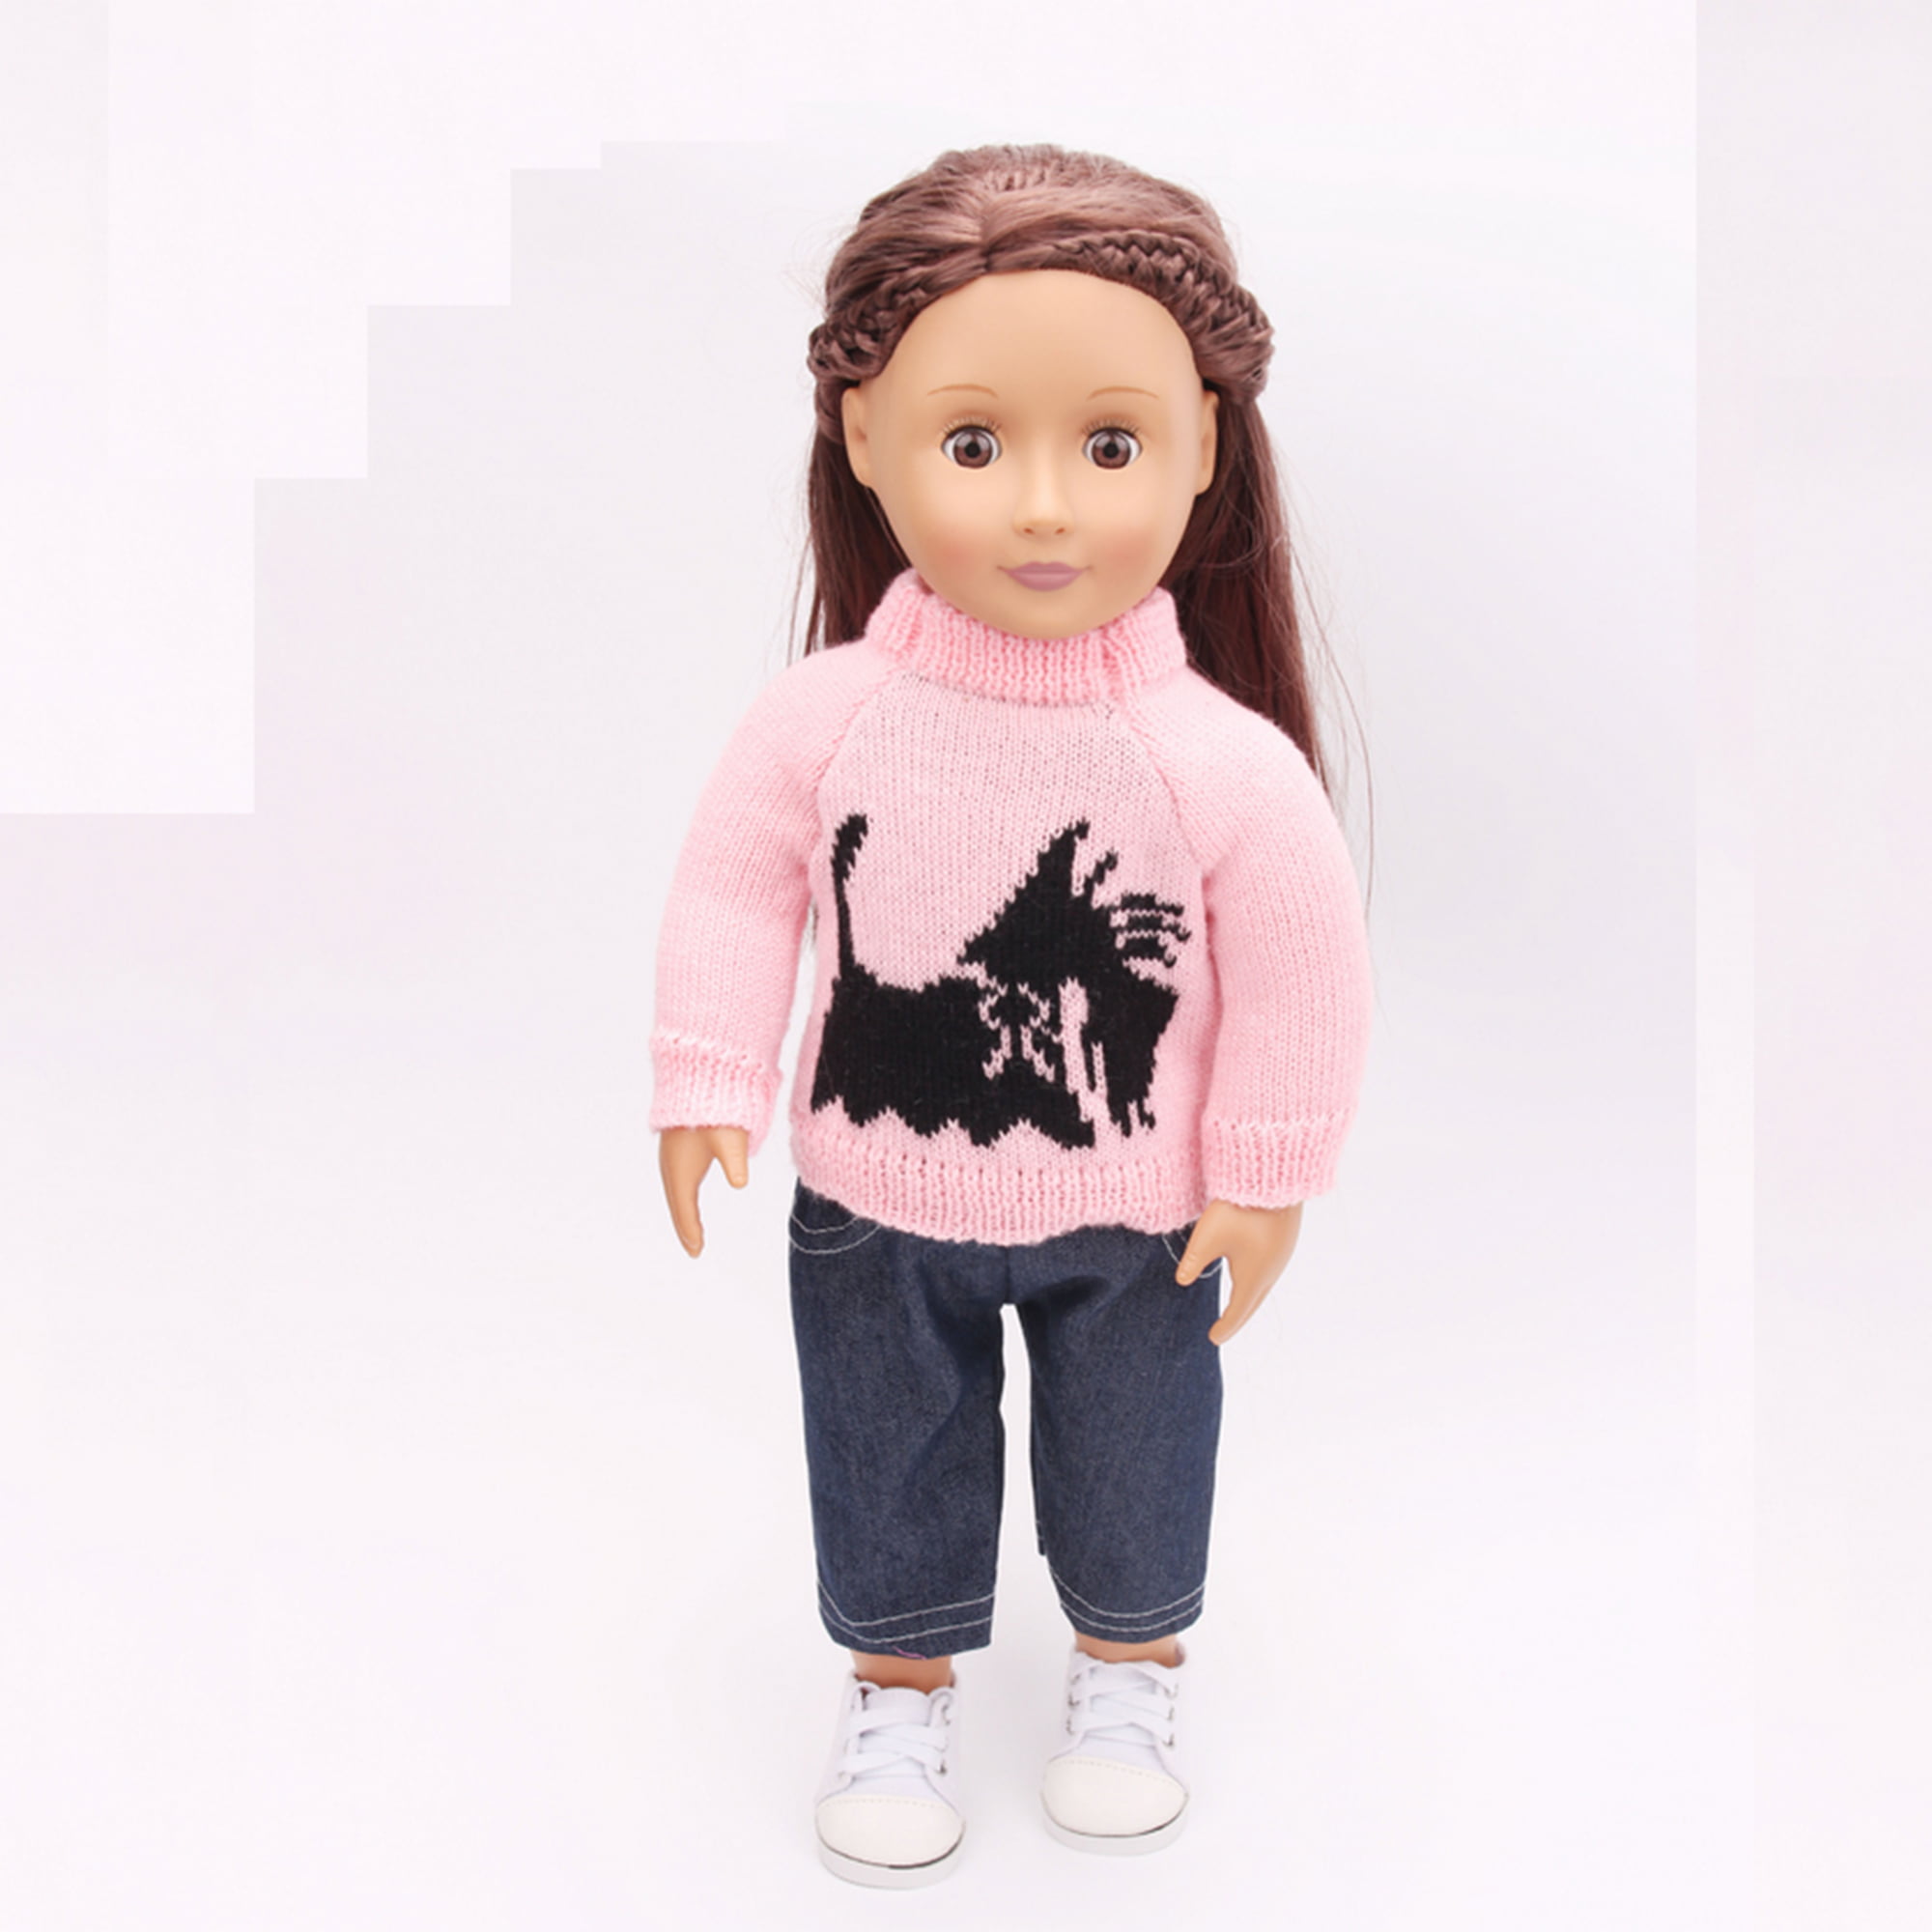 AMERICAN GIRL OUR GENERATION HANDMADE DRESS For 18” DOLL CLOTHES 